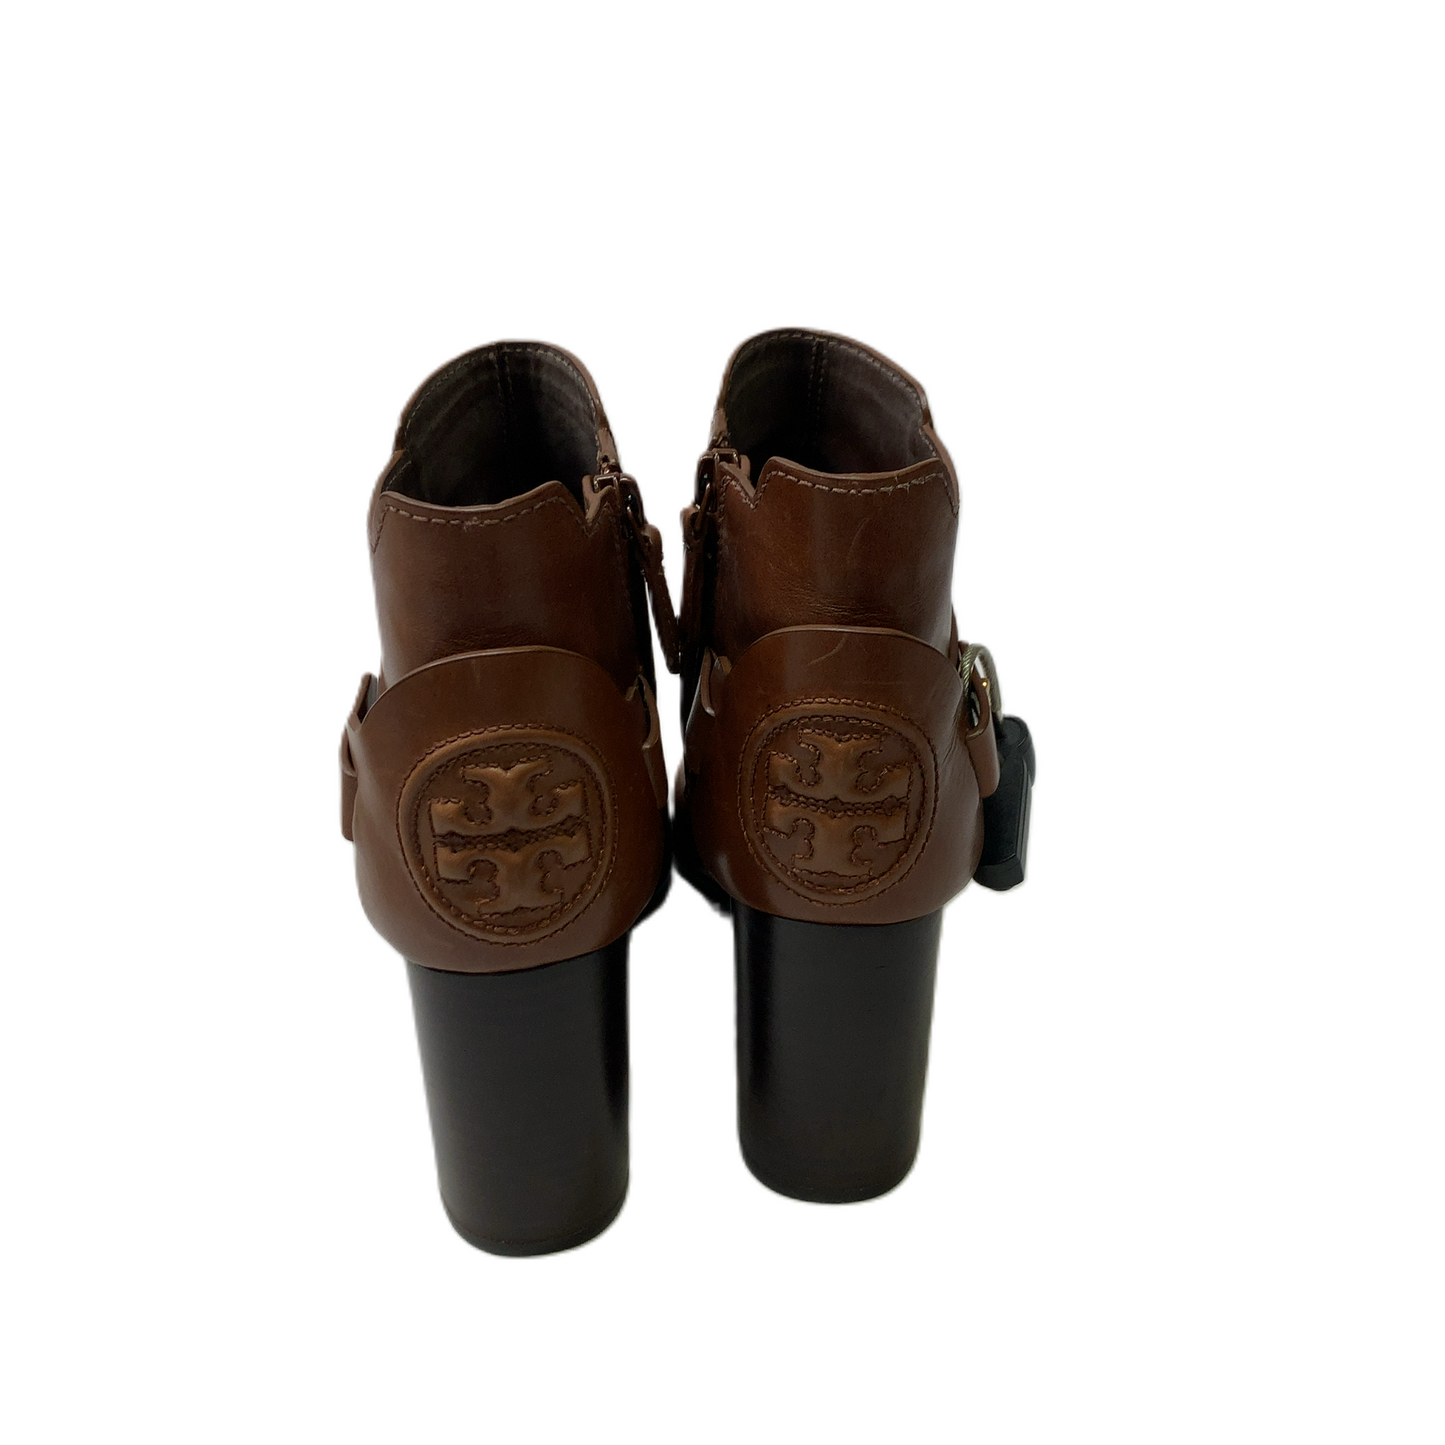 Brown  Boots Designer By Tory Burch  Size: 7